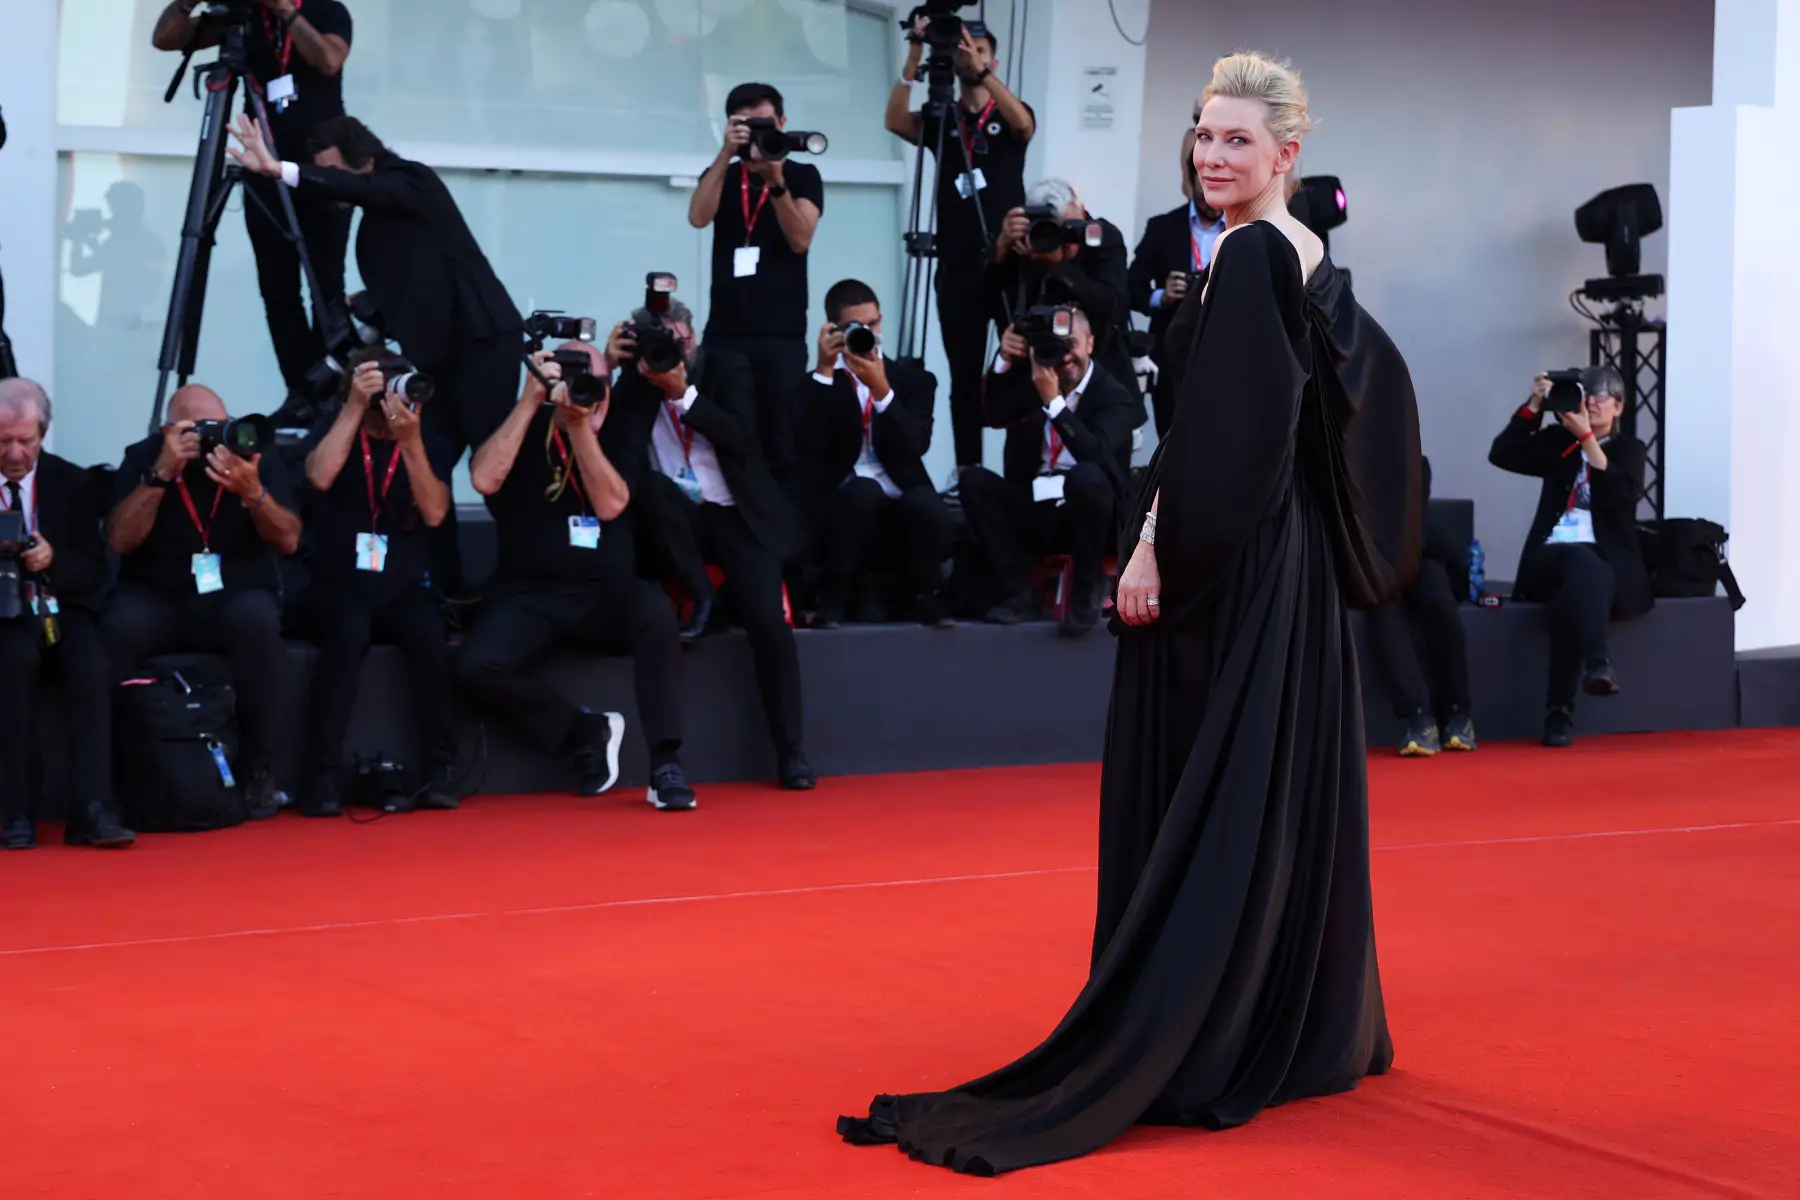 Actress Cate Blanchett posing on the red carpet as she attends the closing ceremony at the 79th Venice International Film Festival in 2022